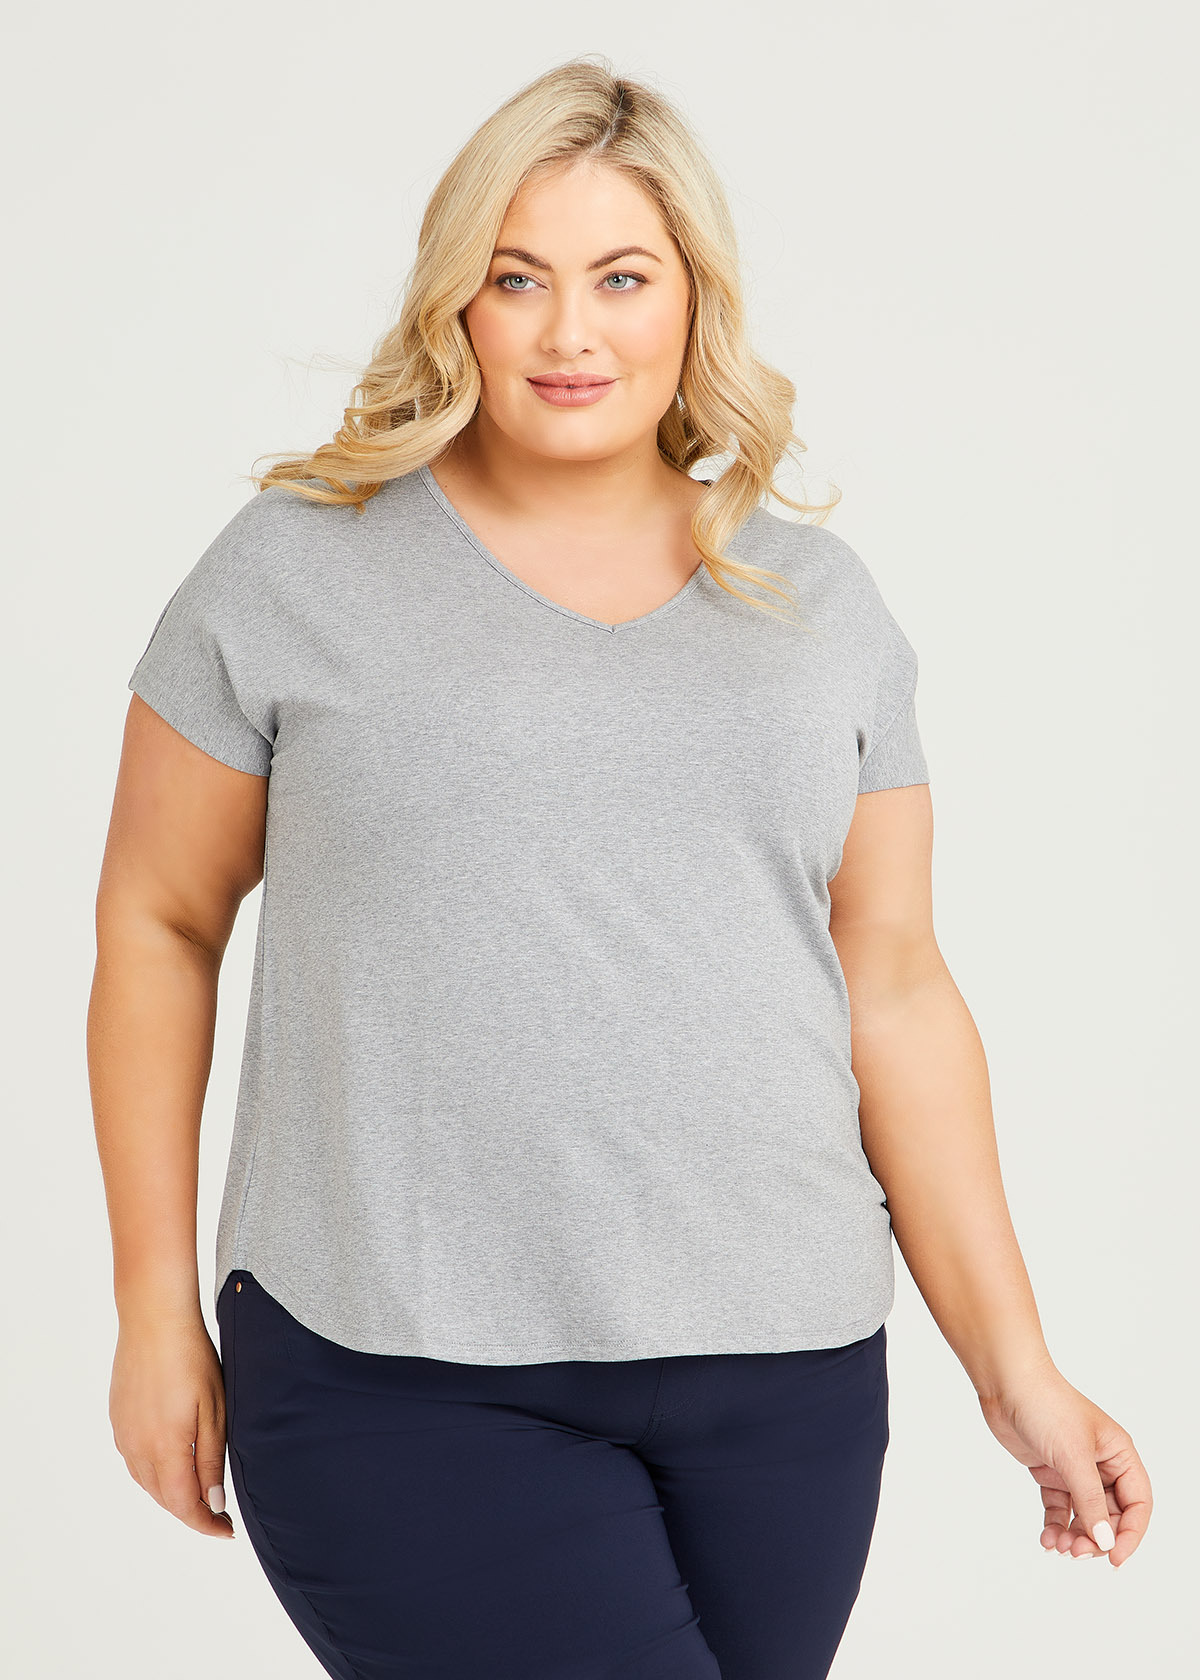 Shop Plus Size Natural Everyday V-neck Top in Grey | Sizes 12-30 ...